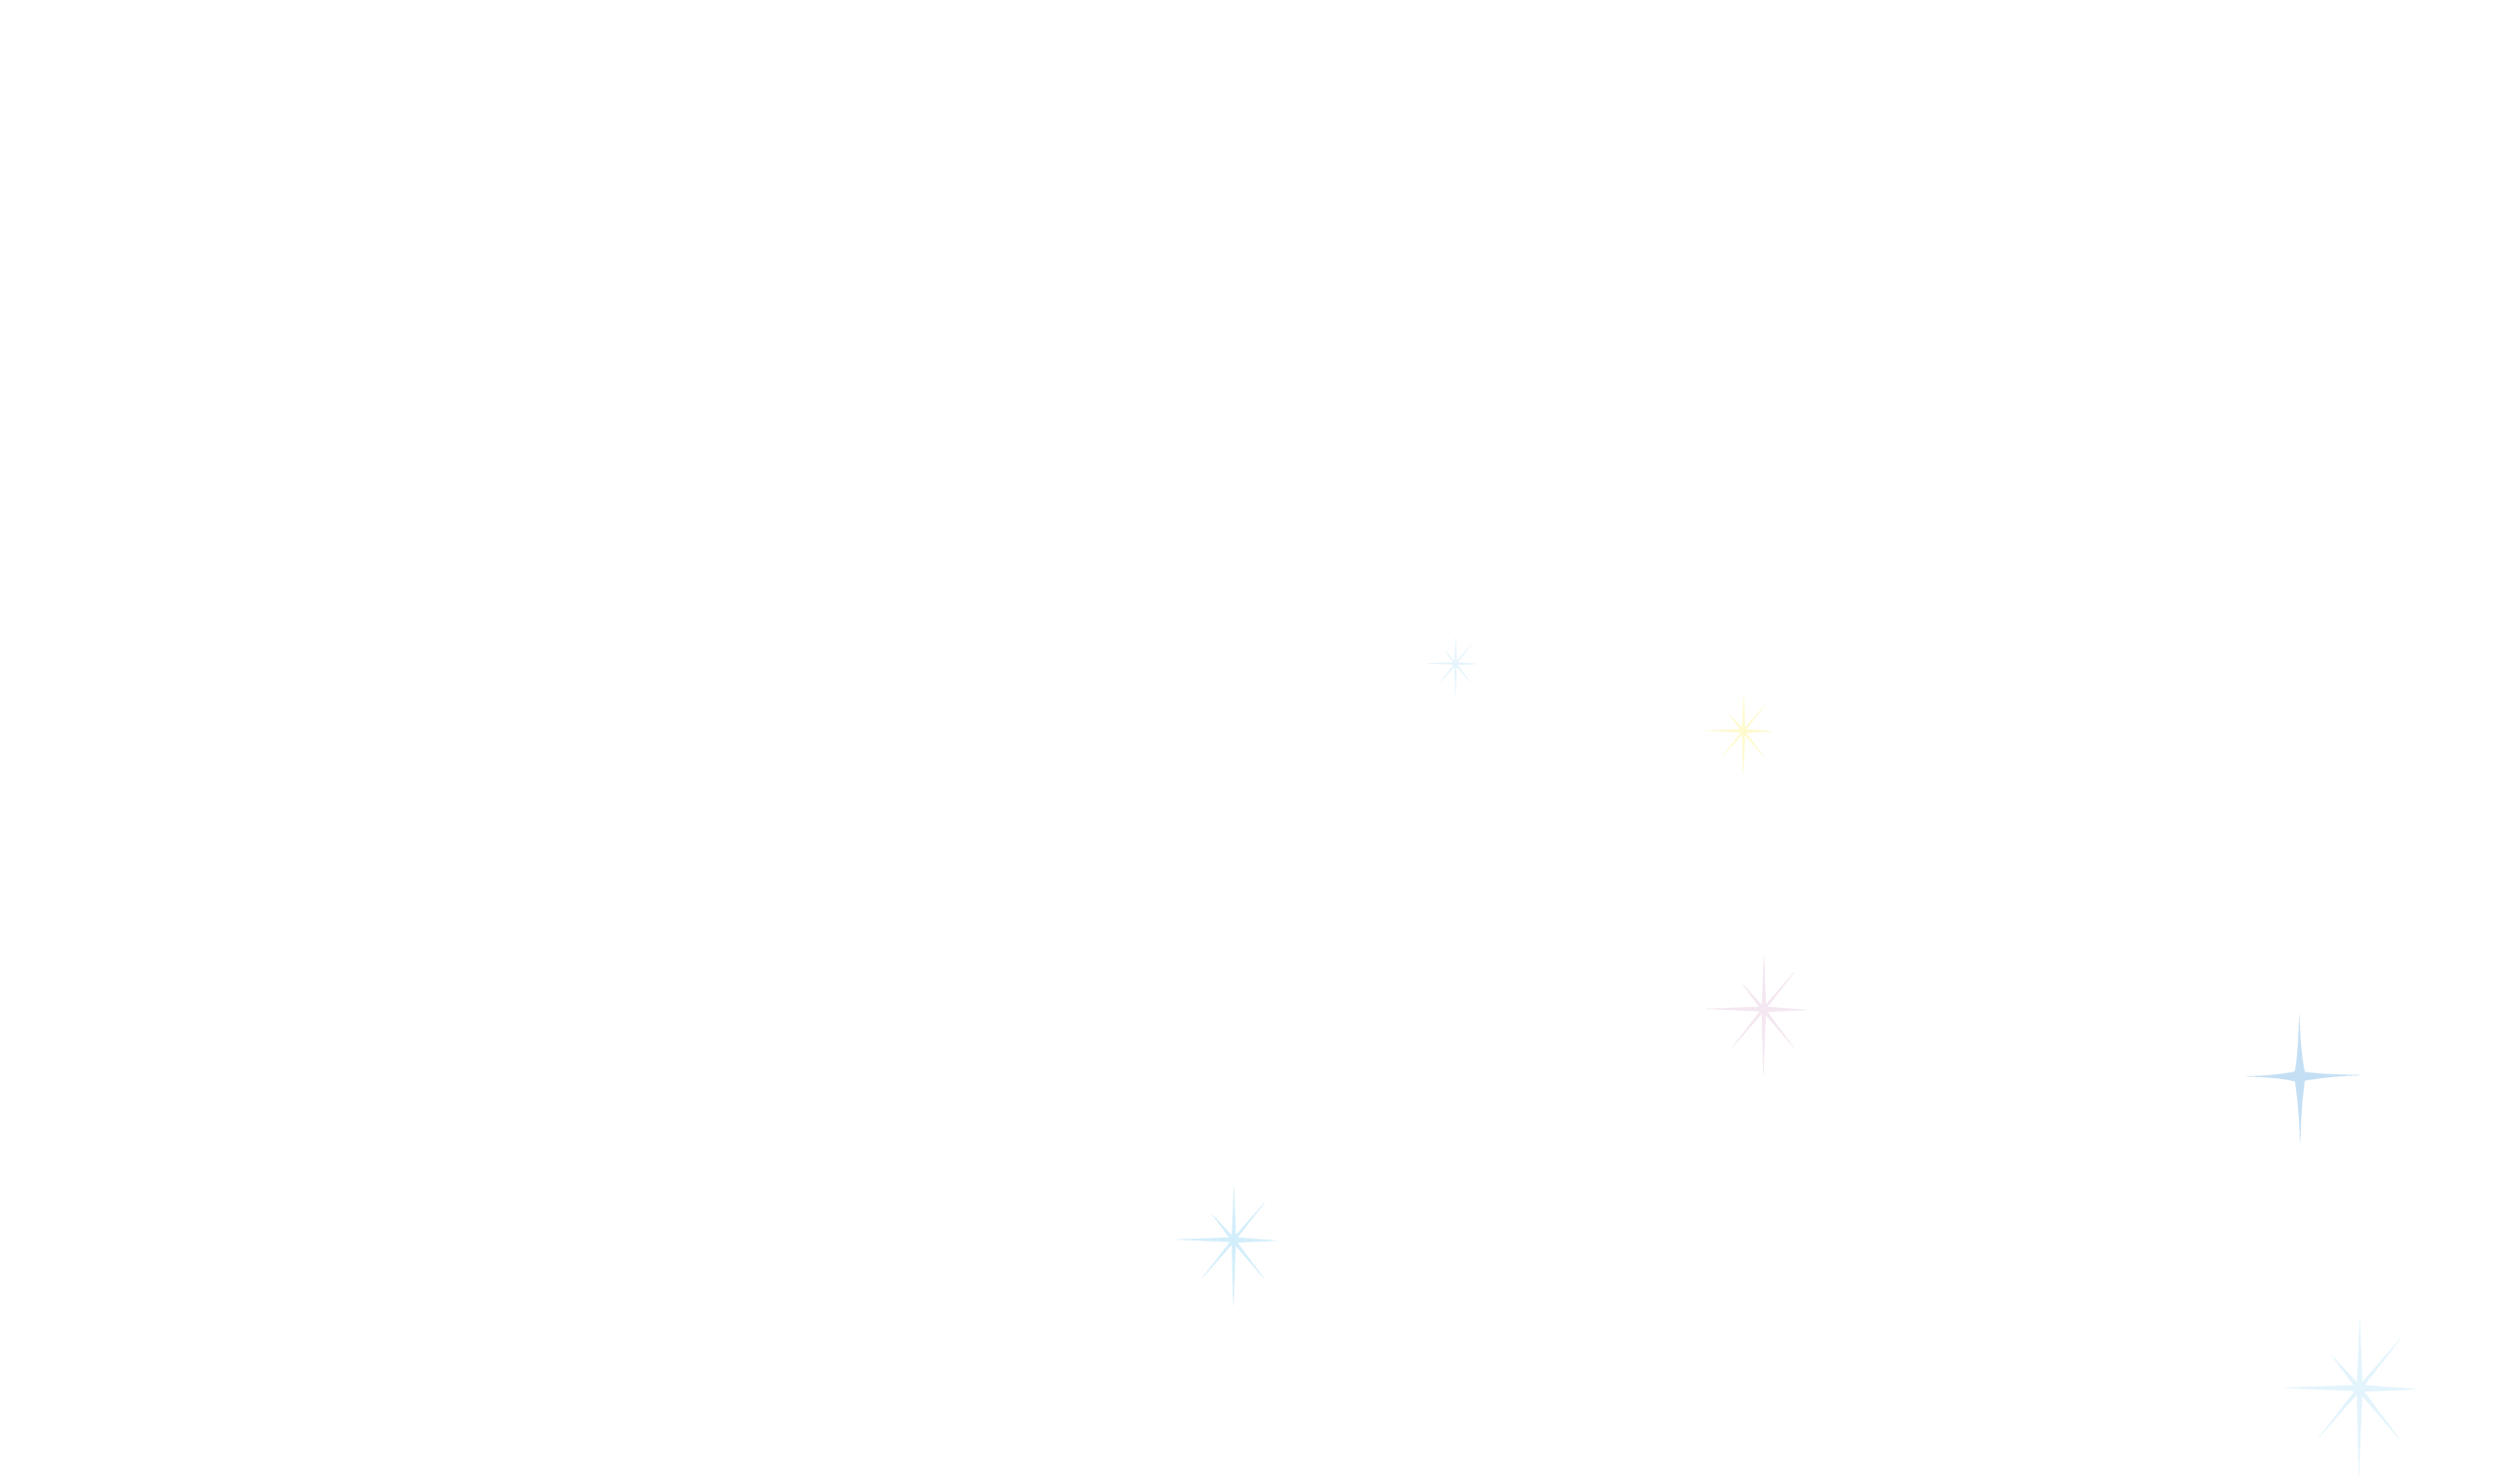 snow overlay clipart free